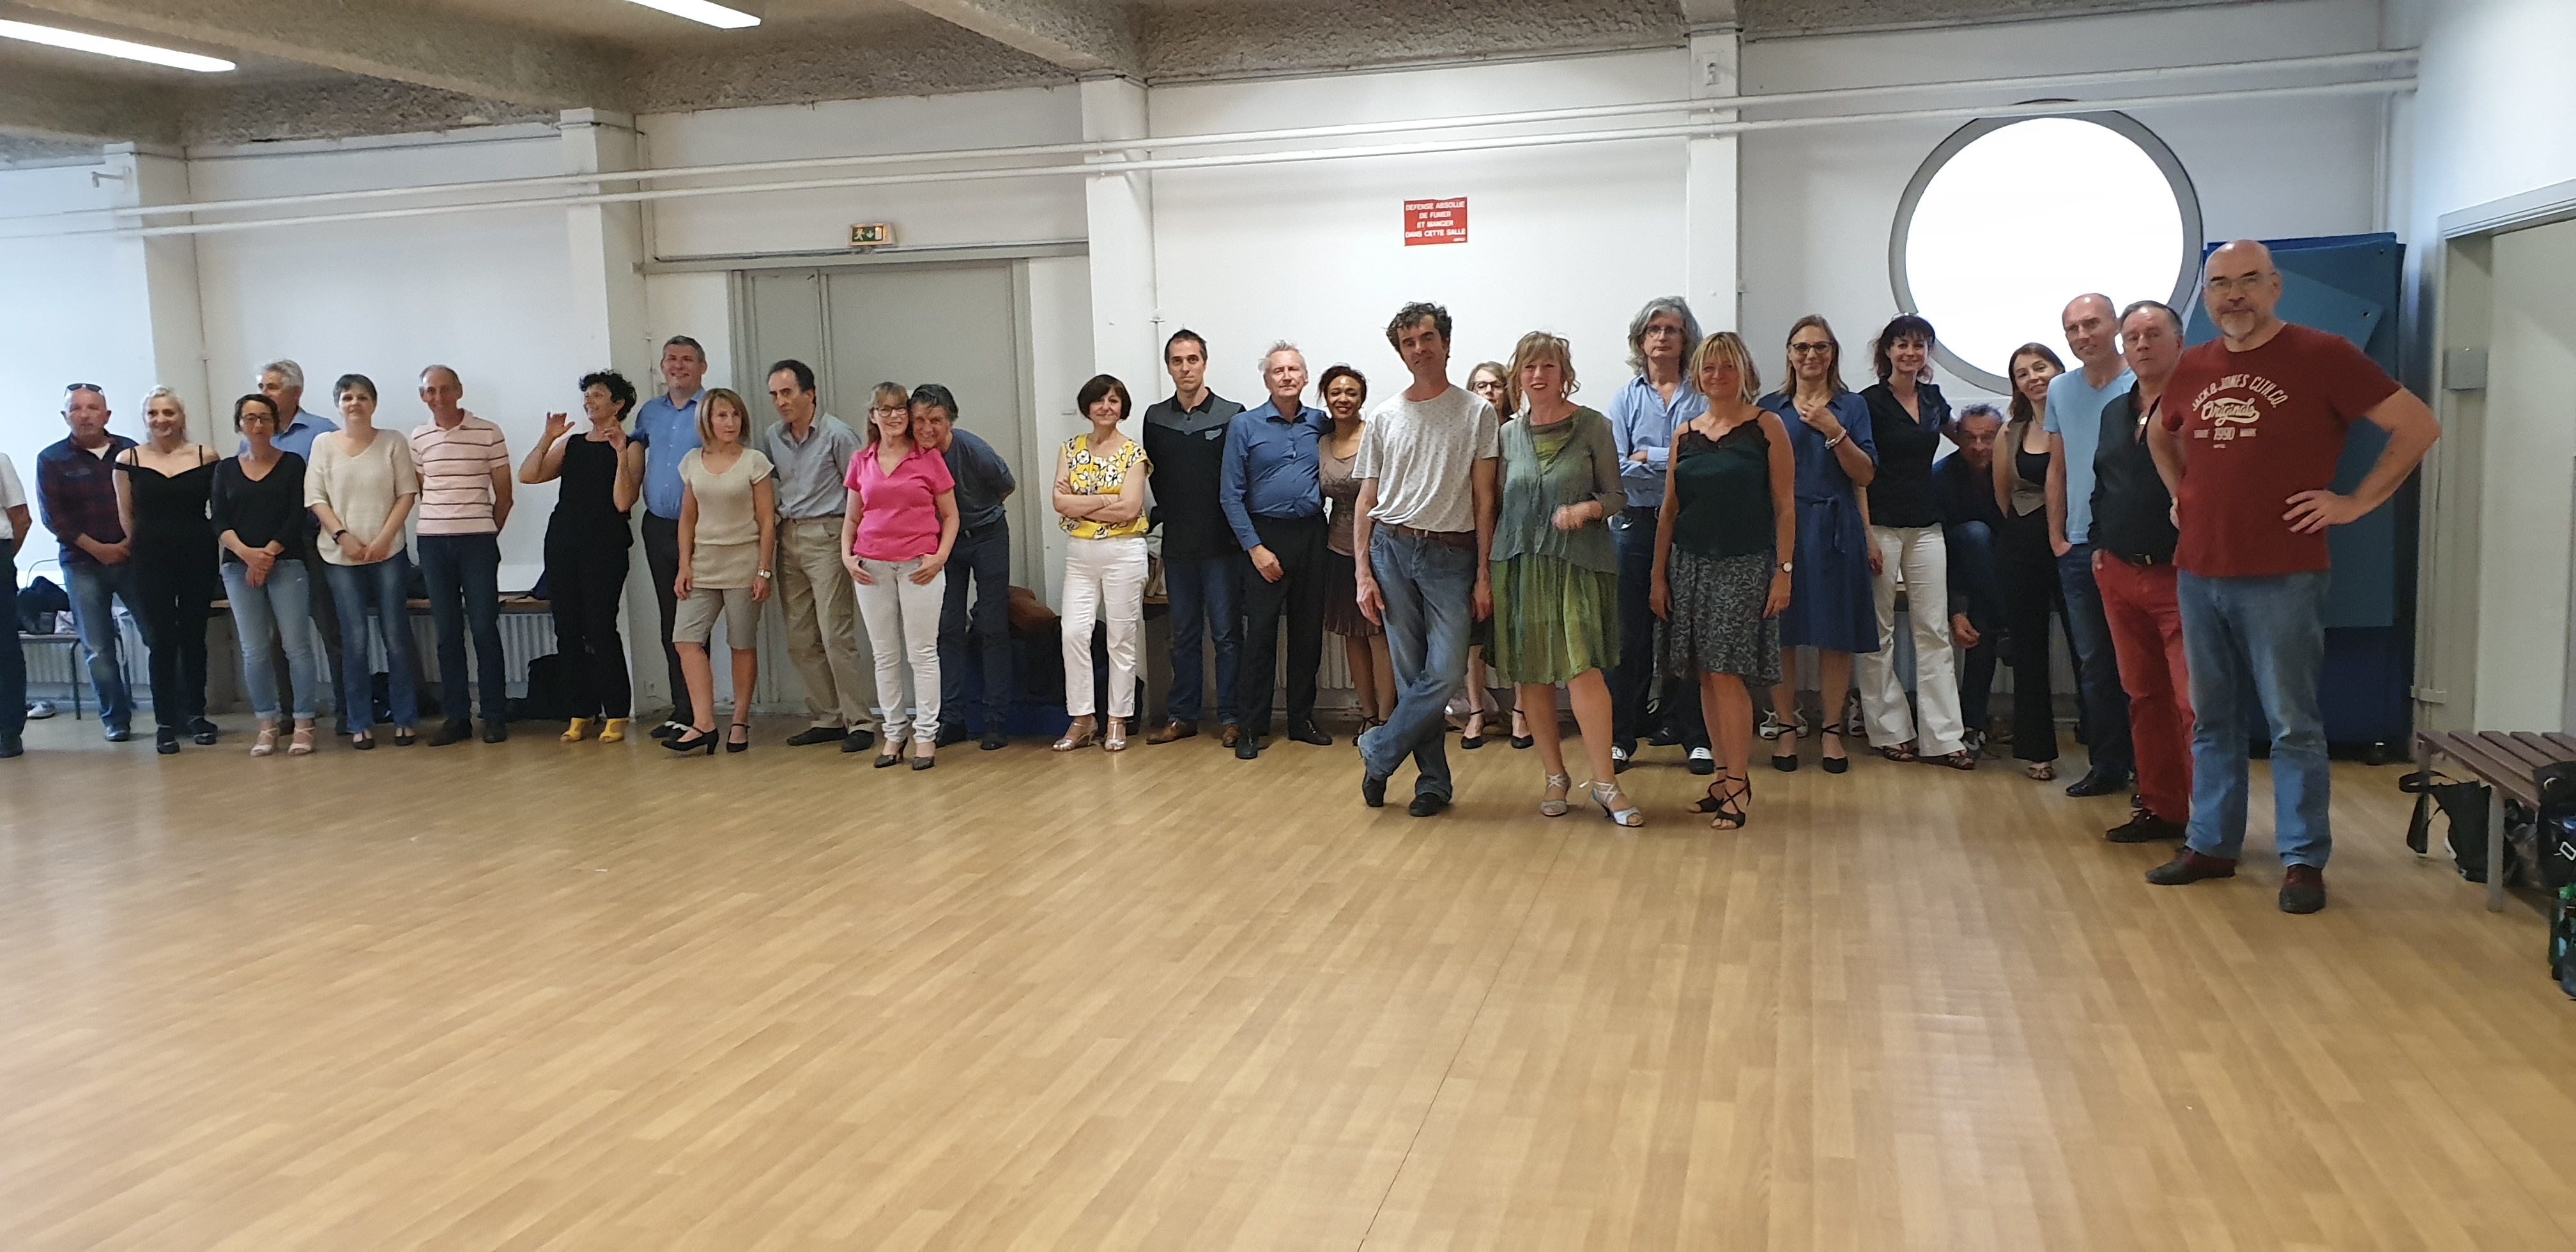 2019 COURS groupe music 2019 05 27_192506.jpg